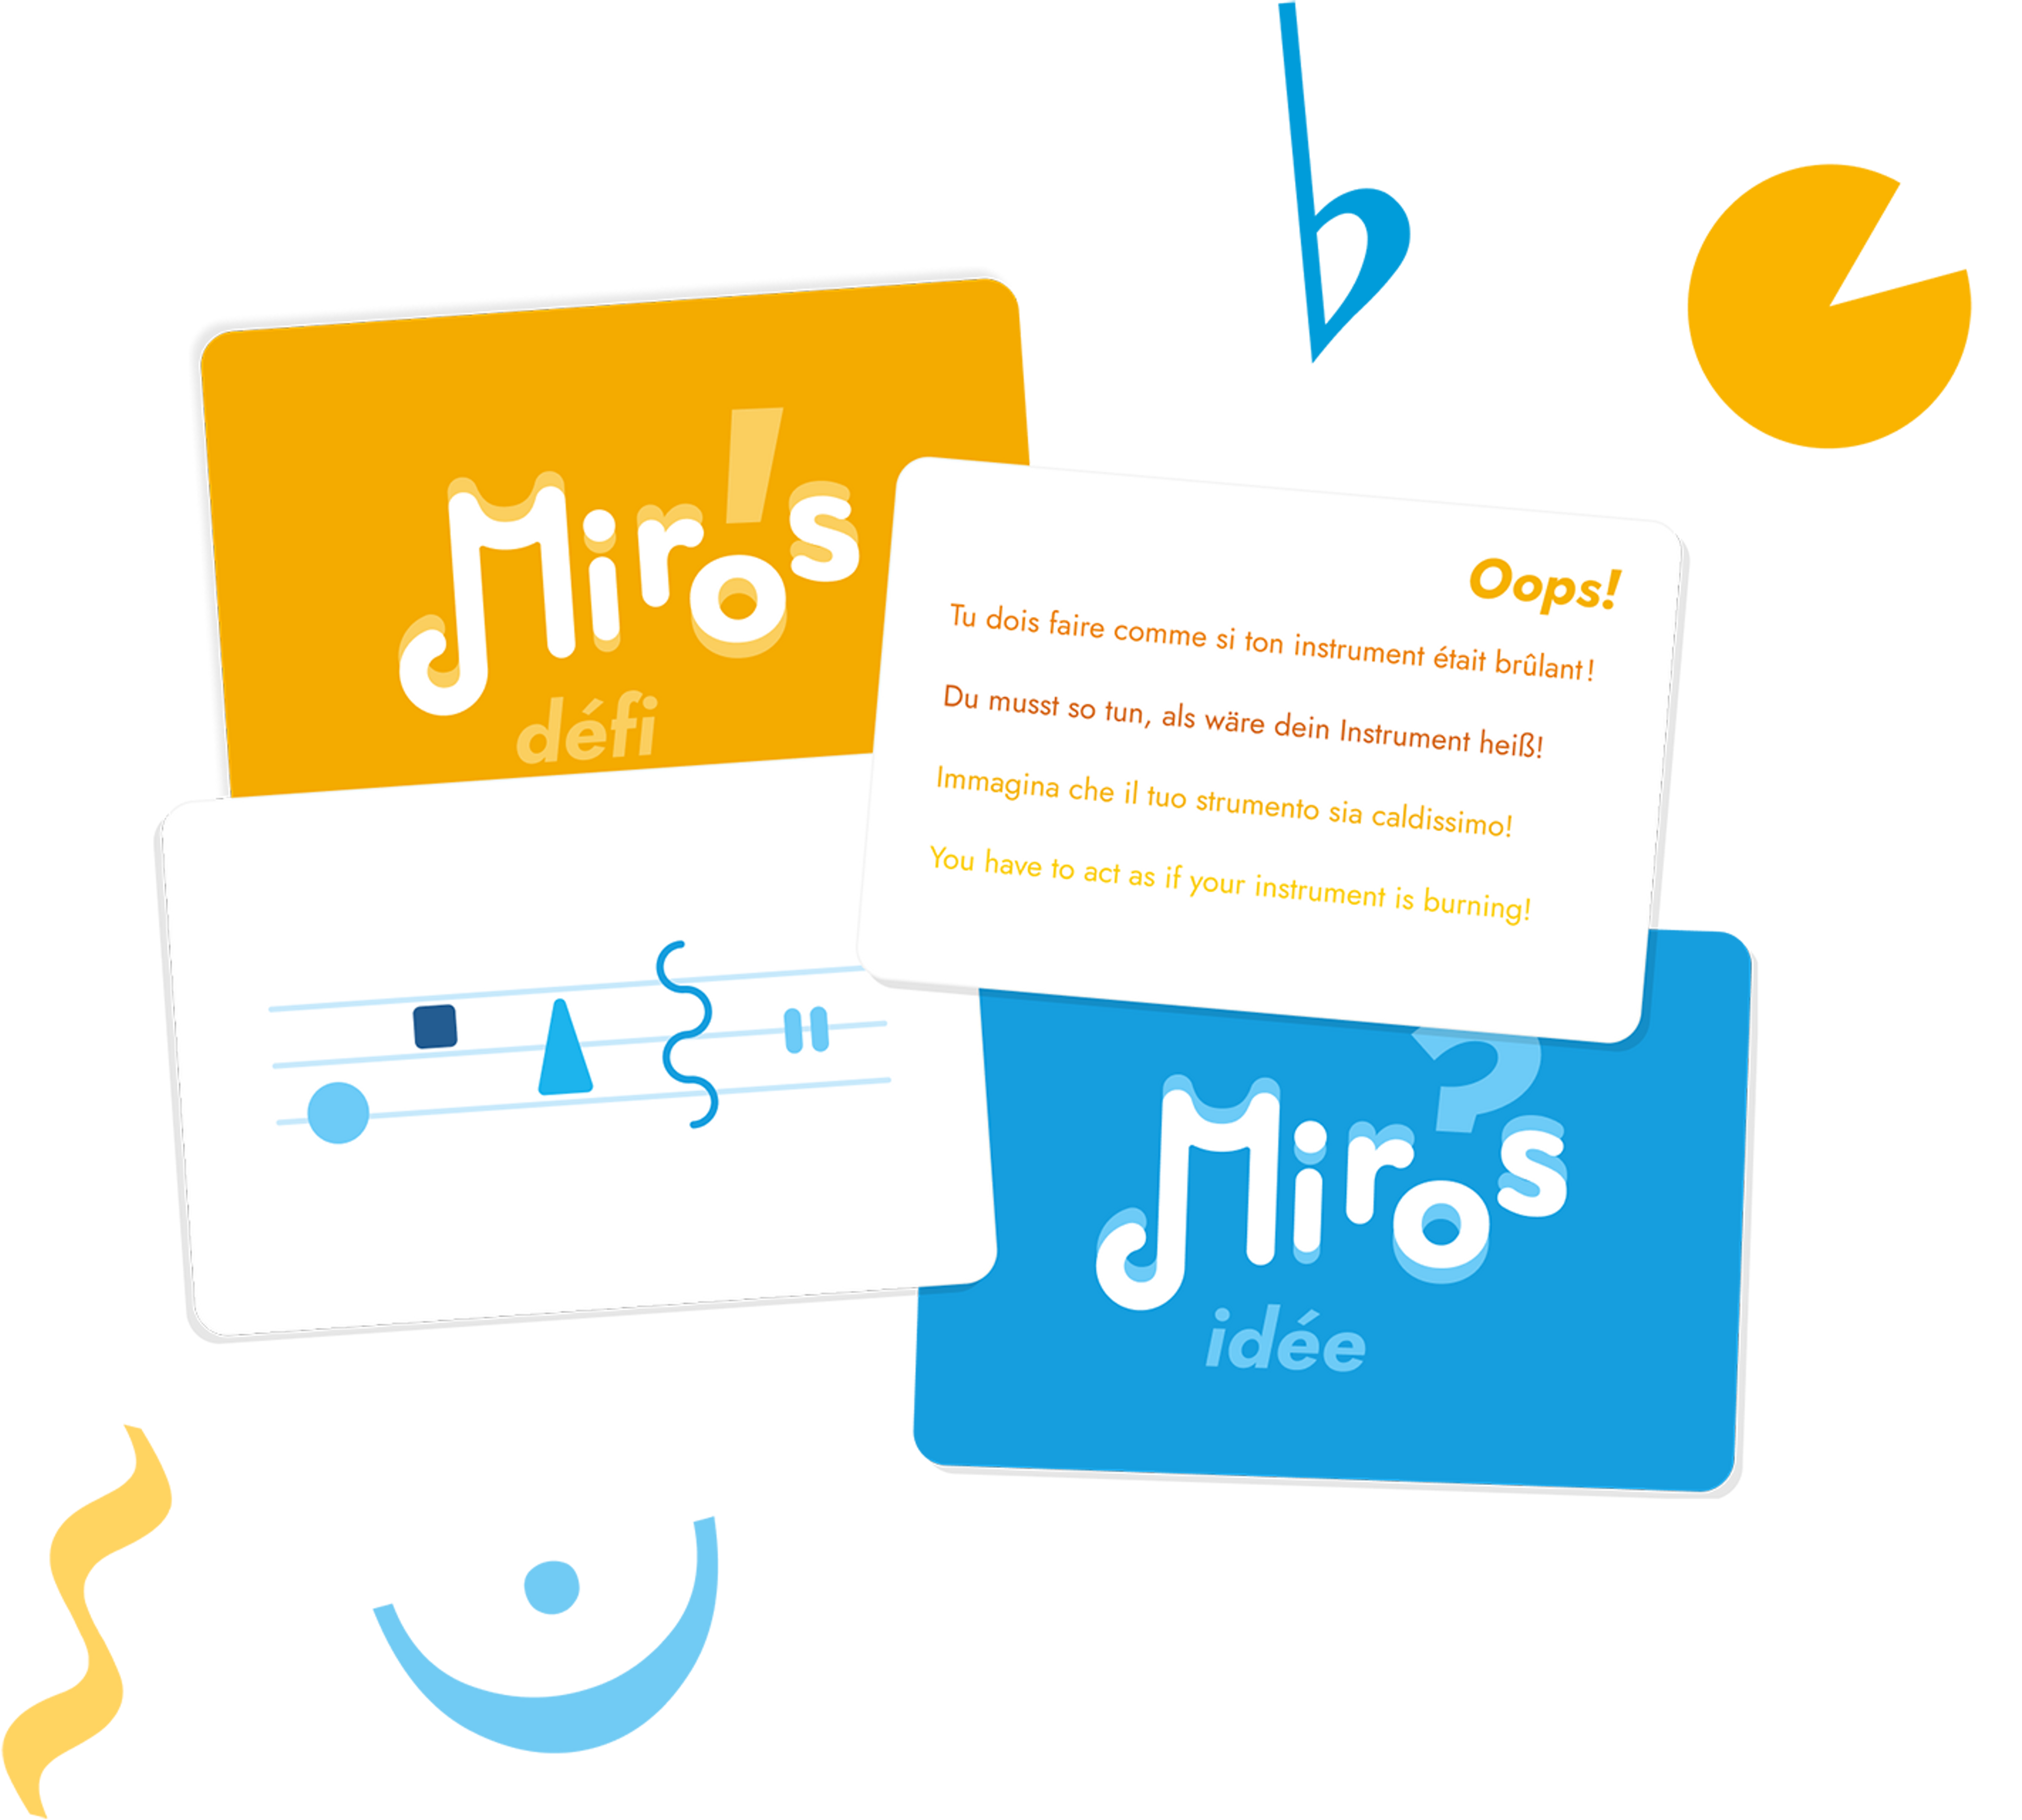 Example of cards from the Miros game. A Challenge card: You have to act as if your instrument is burning! An idea card showing an abstract music score.